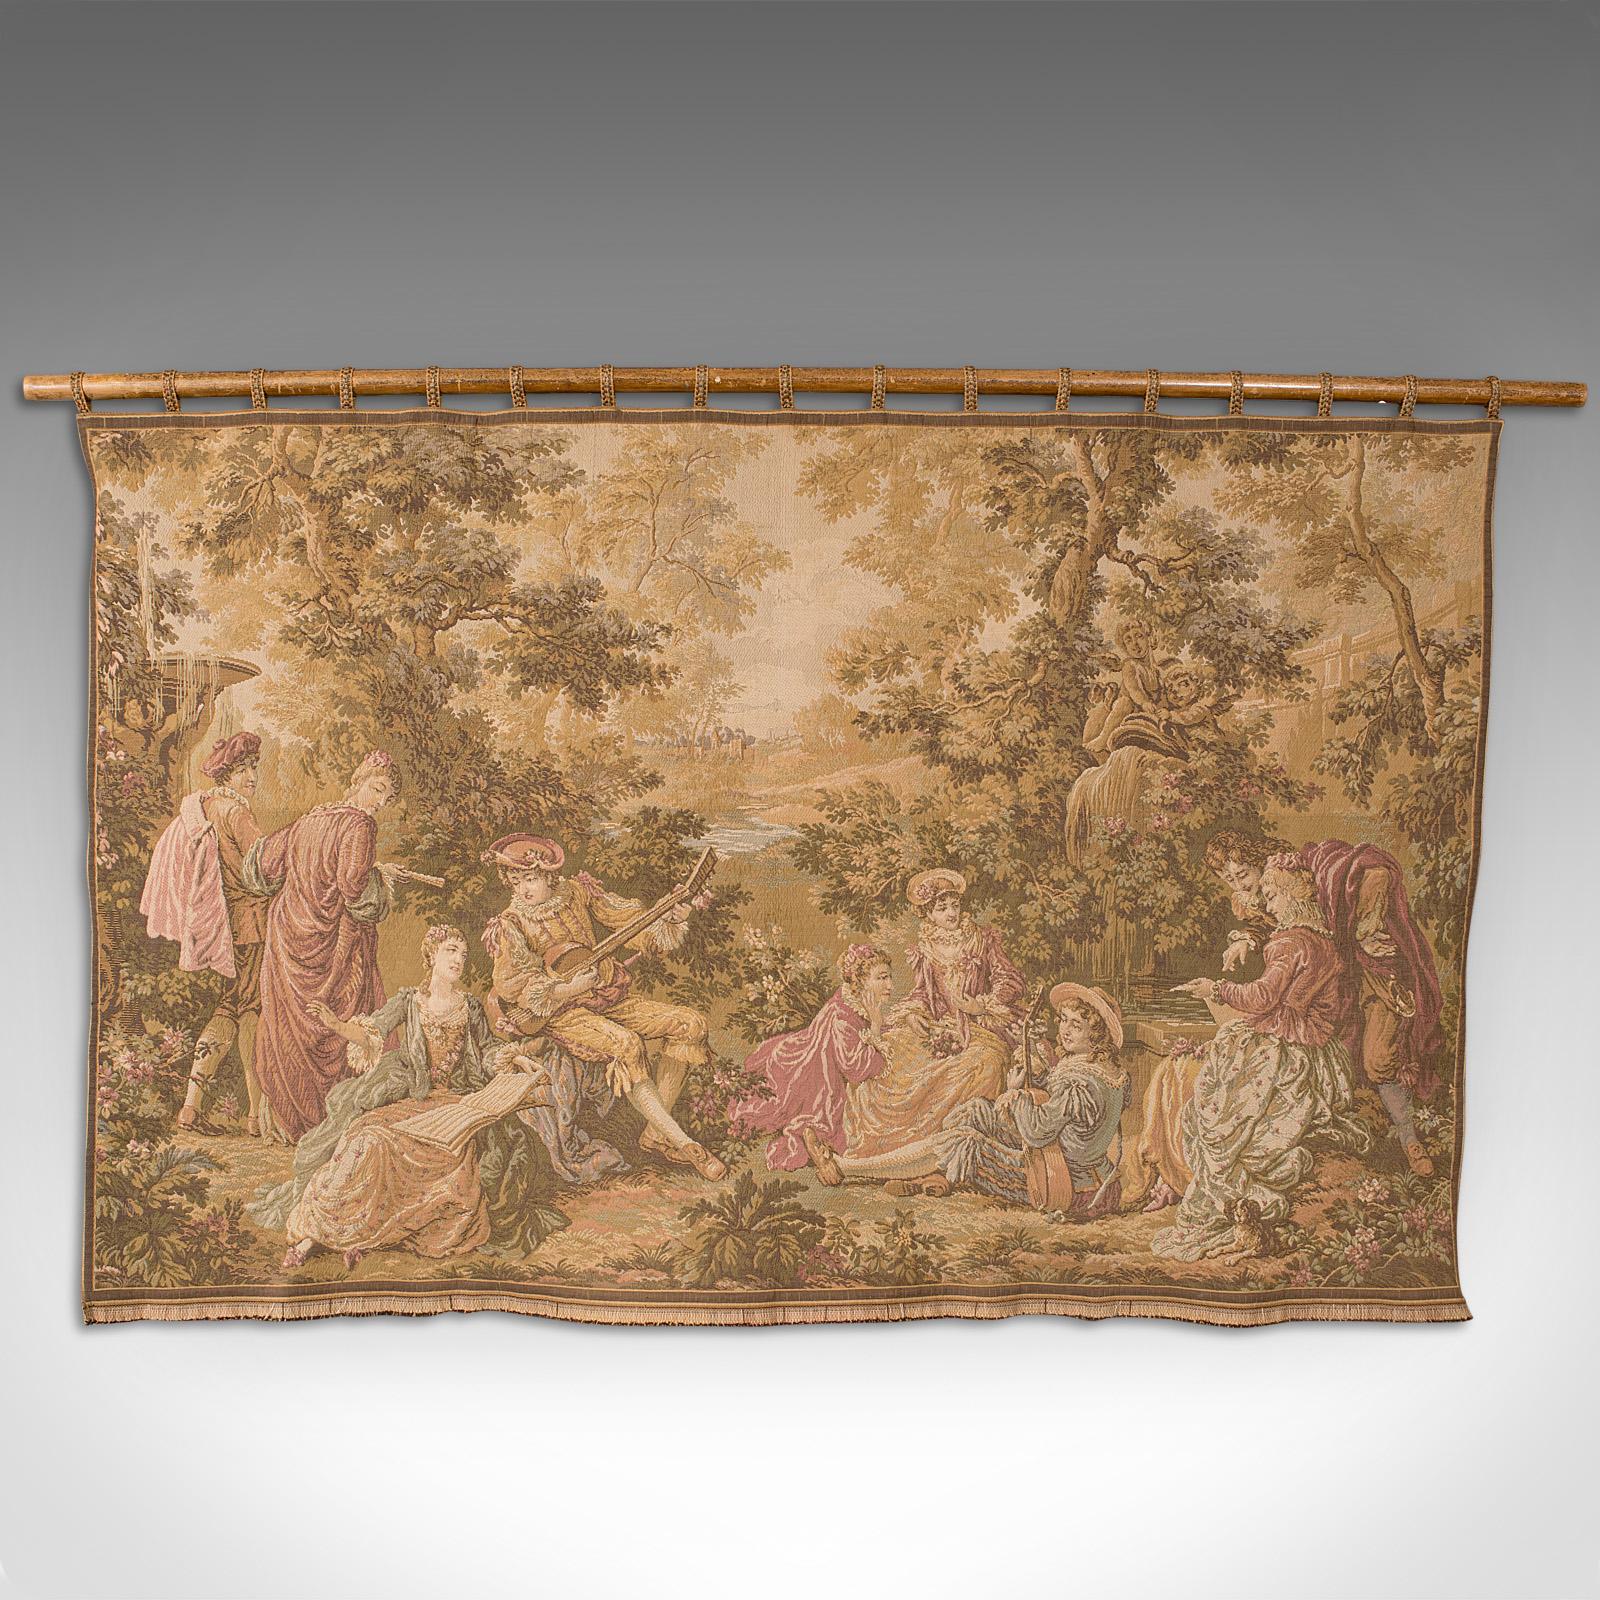 This is a large antique decorative tapestry. A French, needlepoint wall panel with Continental taste, dating to the late Victorian period, circa 1900.

Classically appealing tapestry scene with companion hanging rail
Displays a desirable aged